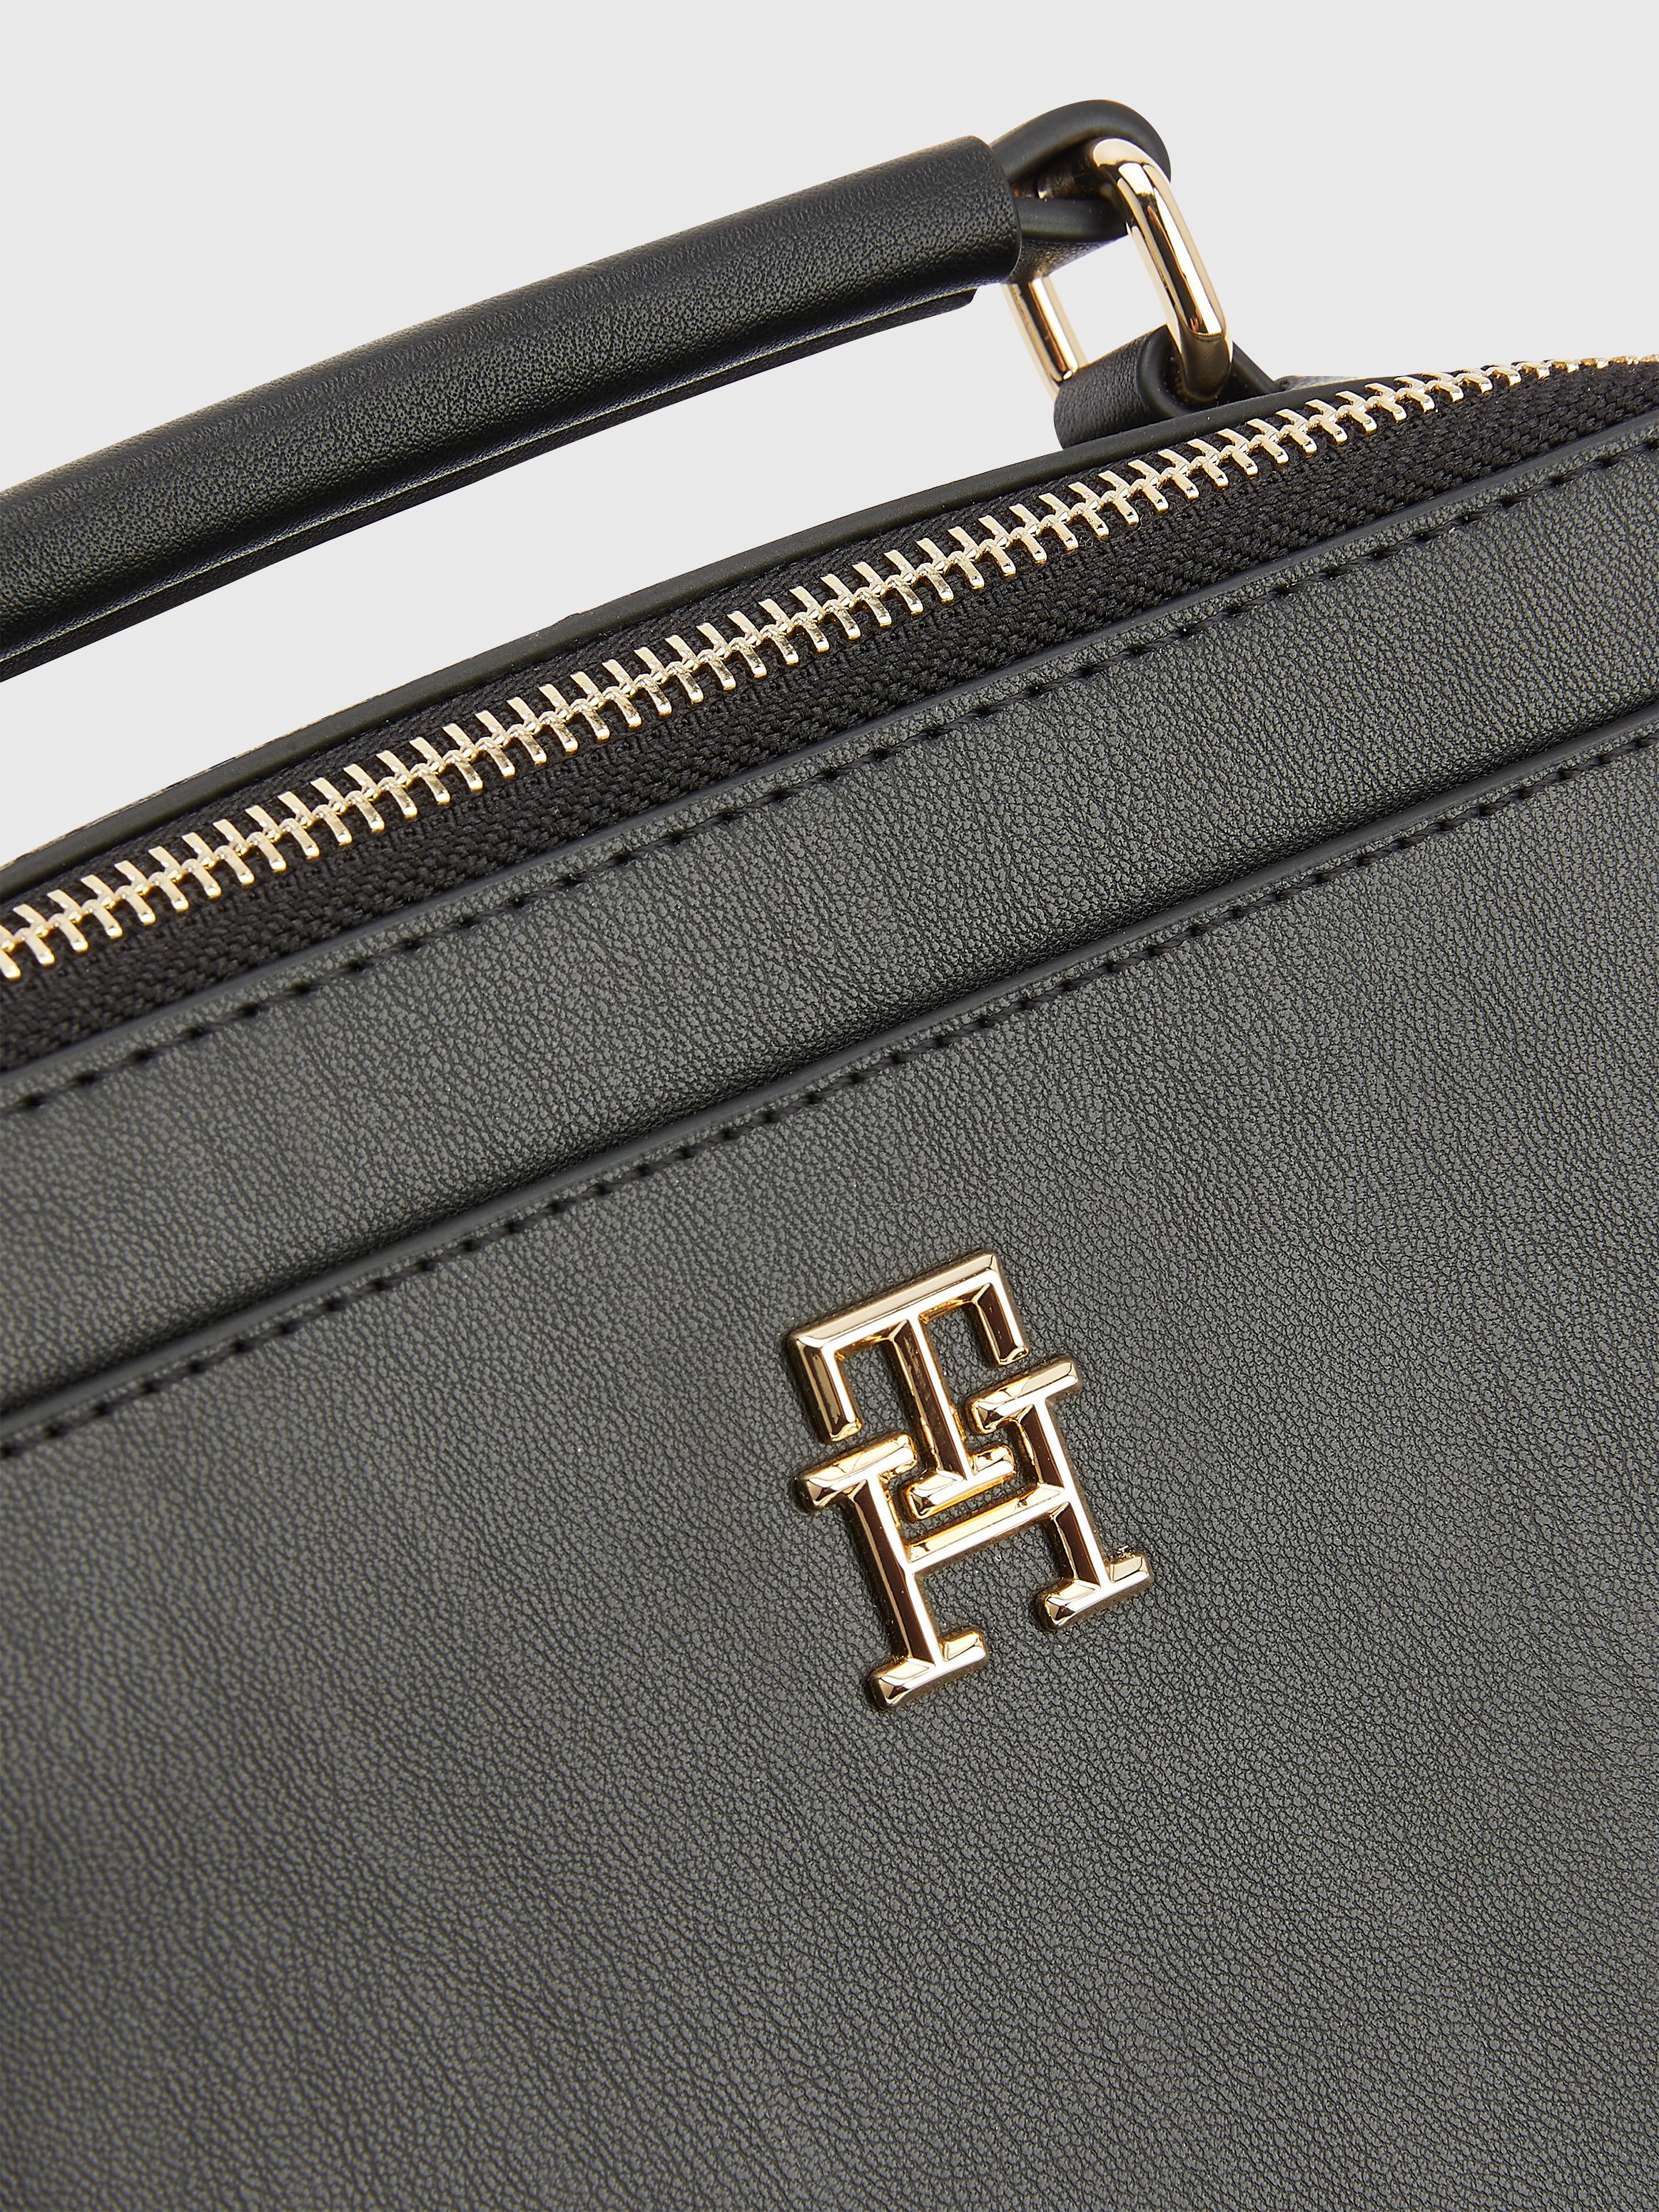 Iconic TH Monogram Crossover Bag | Tommy Hilfiger